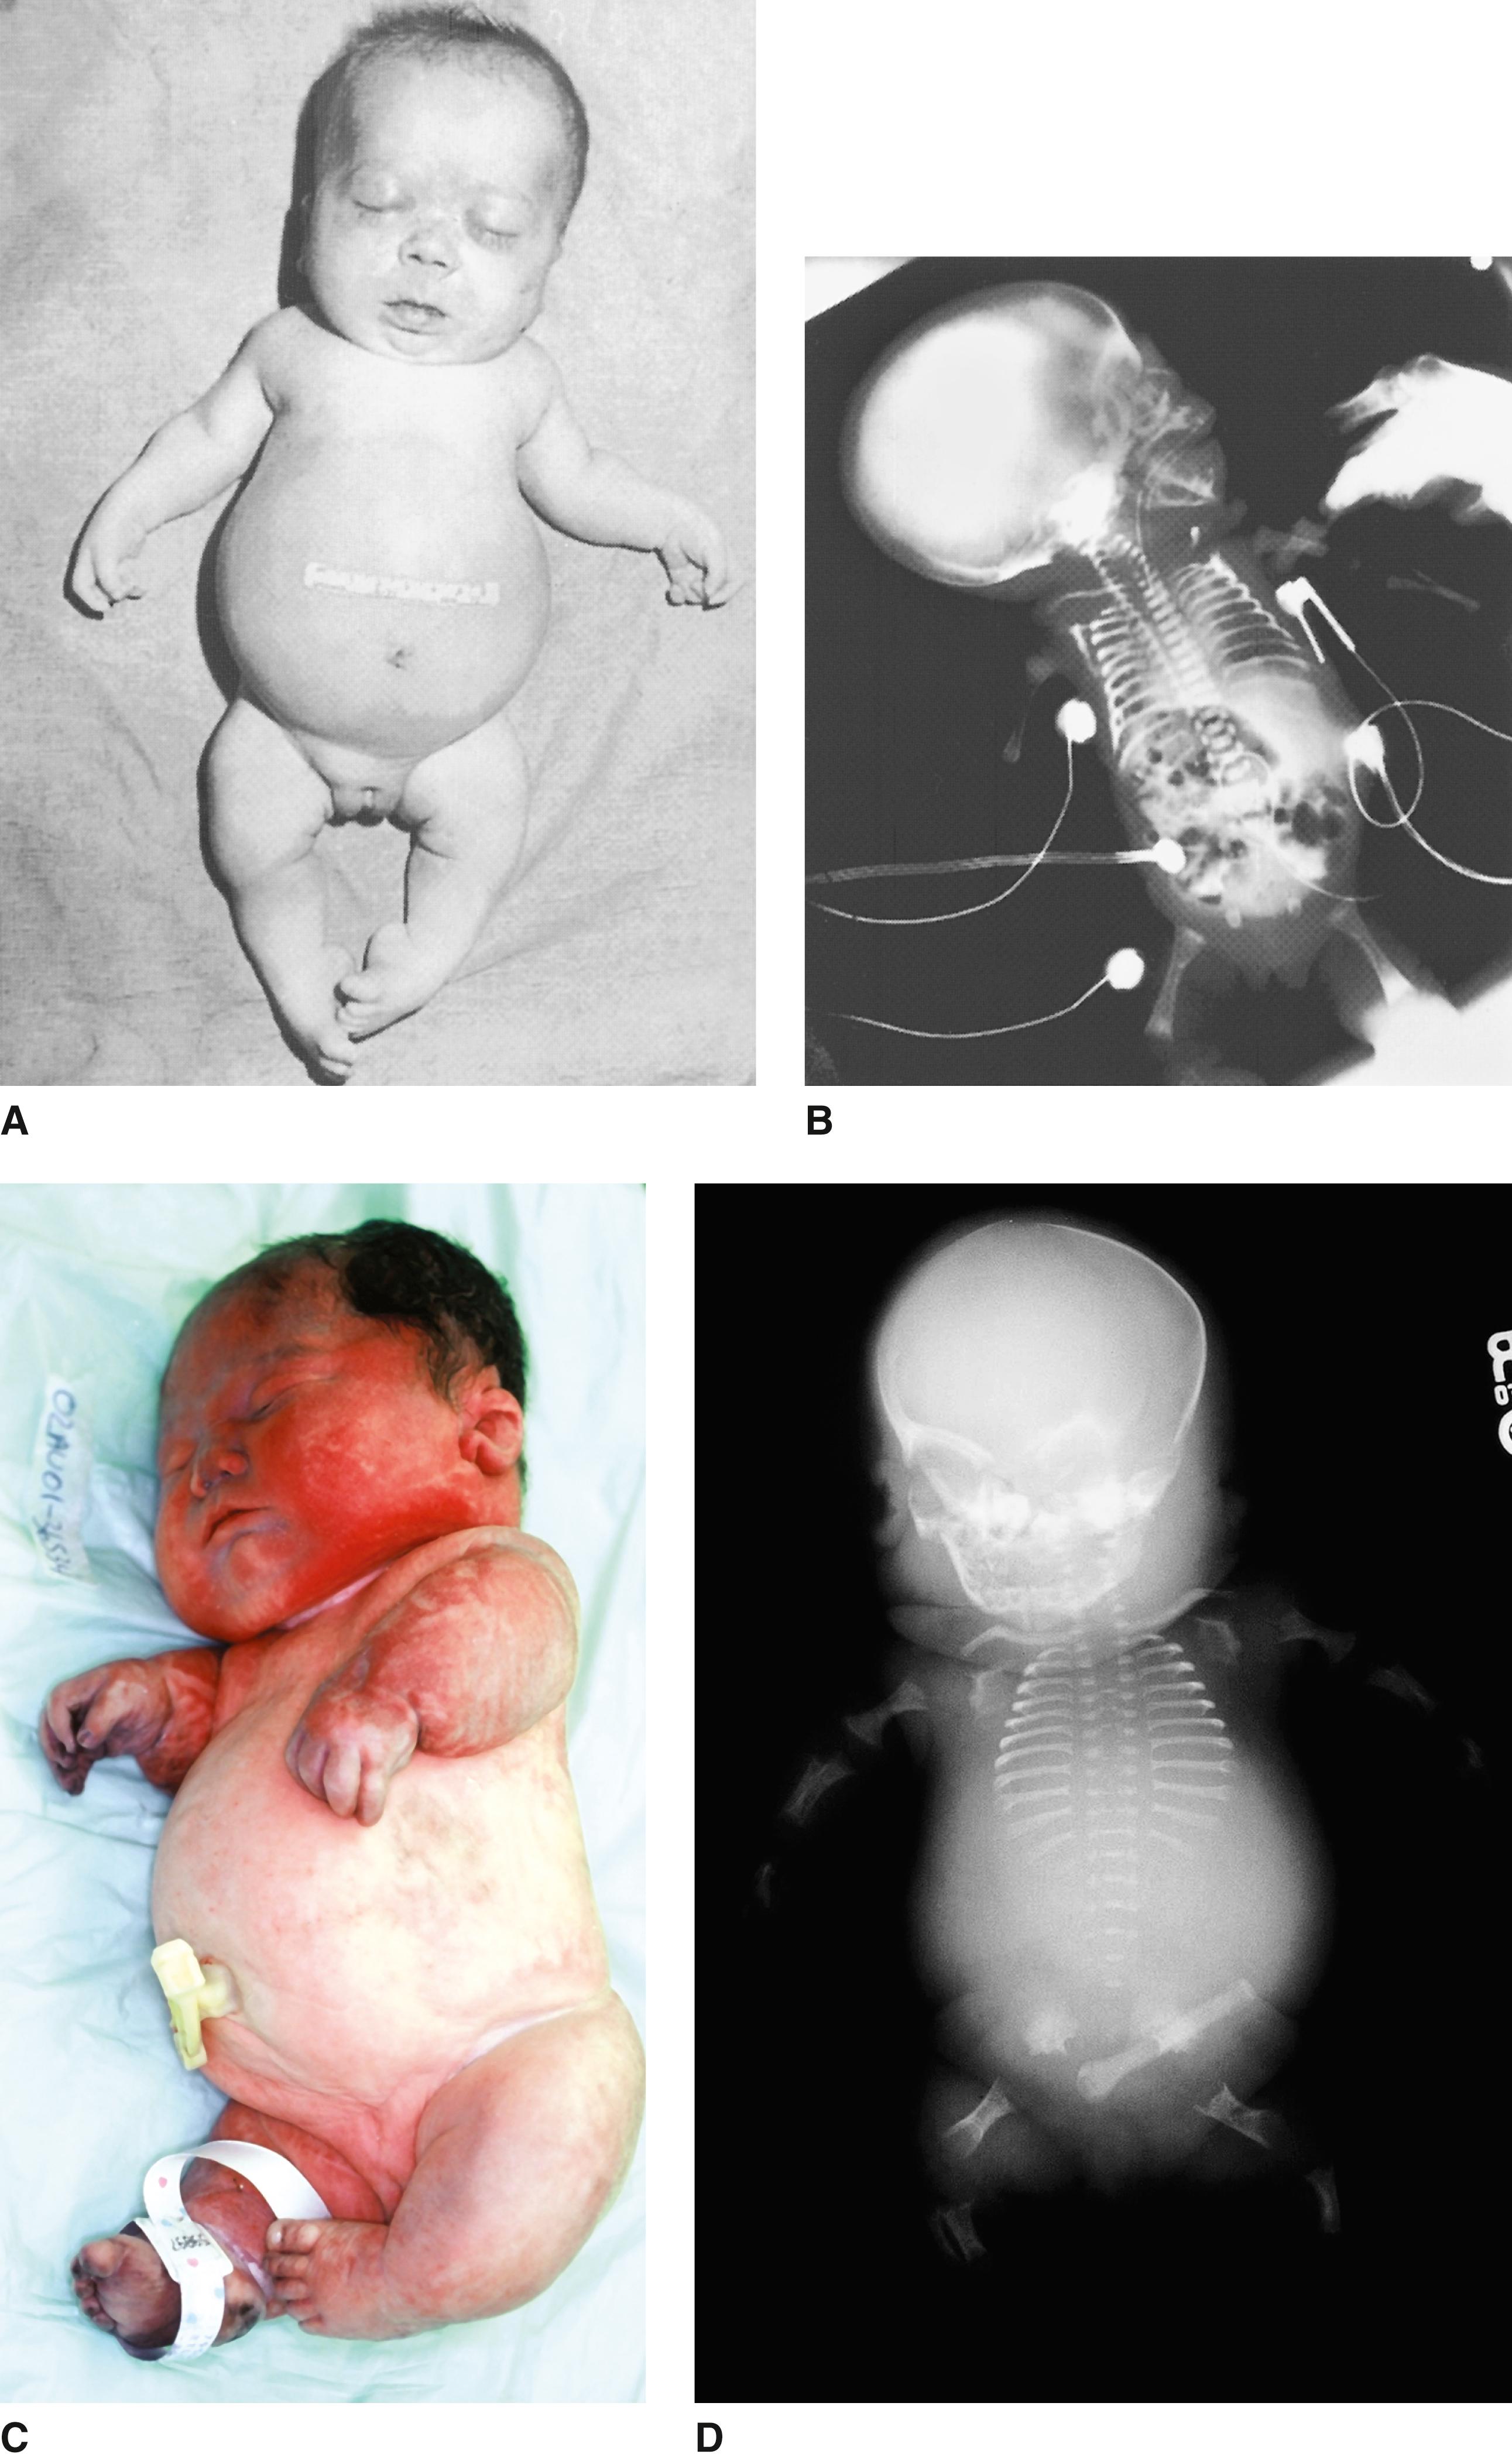 FIGURE 1, Two stillborn infants with type II achondrogenesis-hypochondrogenesis, showing the variation in severity of the disorder. Note the relatively normal cranial ossification, short ribs, and variable degrees of failure of ossification of lumbar and cervical spines, sacrum, and ischial and pubic bones.